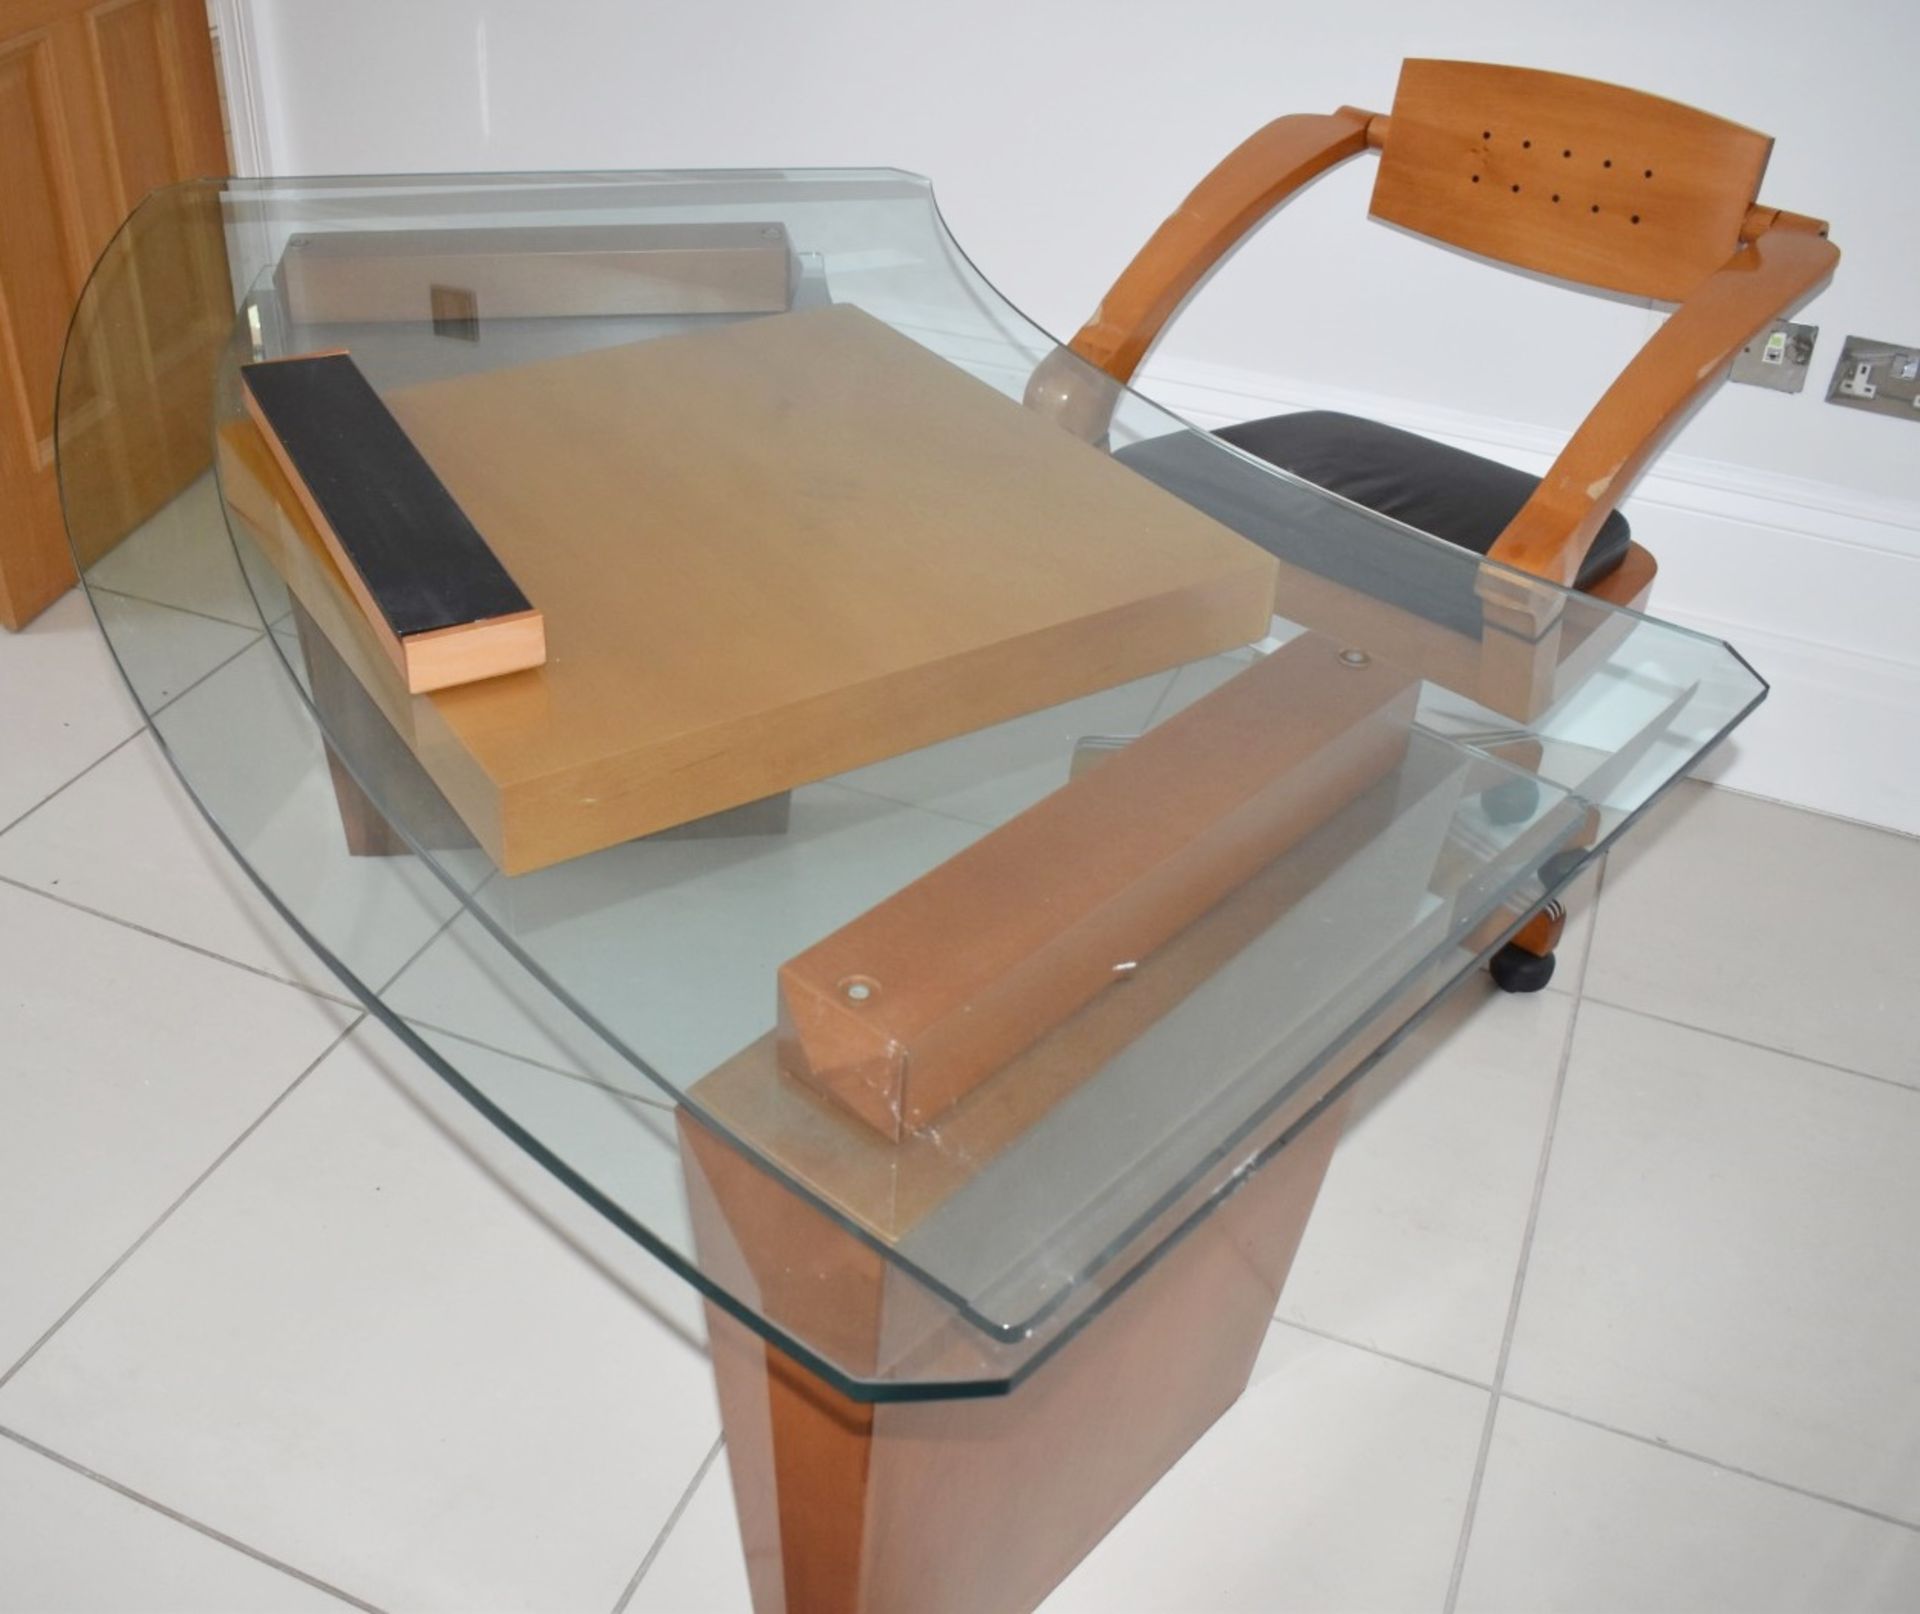 1 x Giorgetti Office Desk With Two Spring Chairs By Massimo Scolari - From an Exclusive Hale - Image 12 of 34